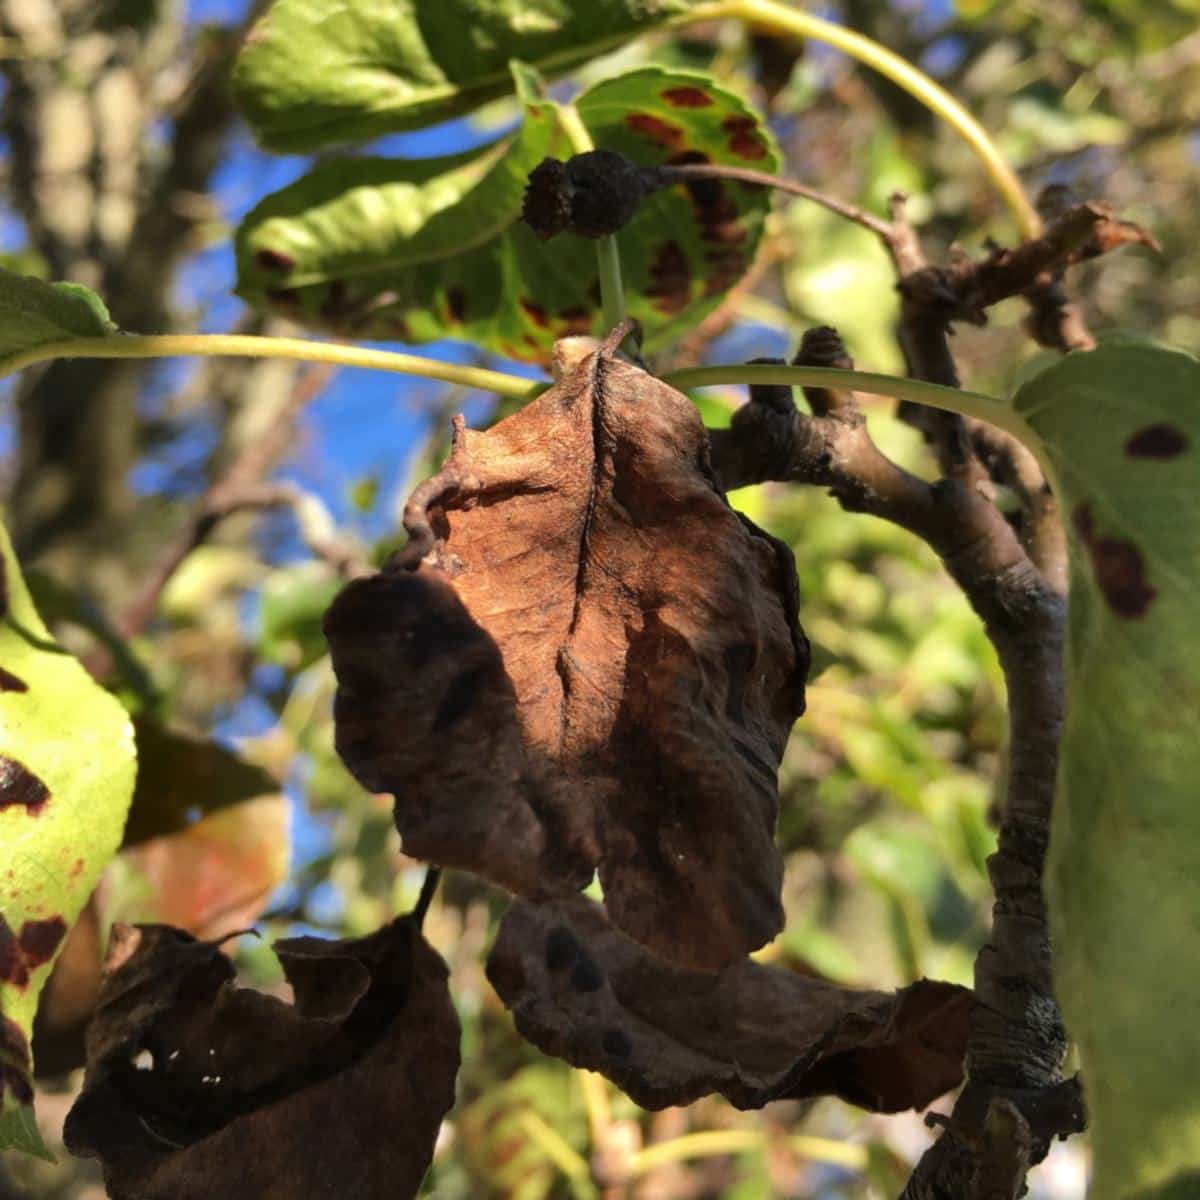 Symptoms of fire blight include red, dry leaves